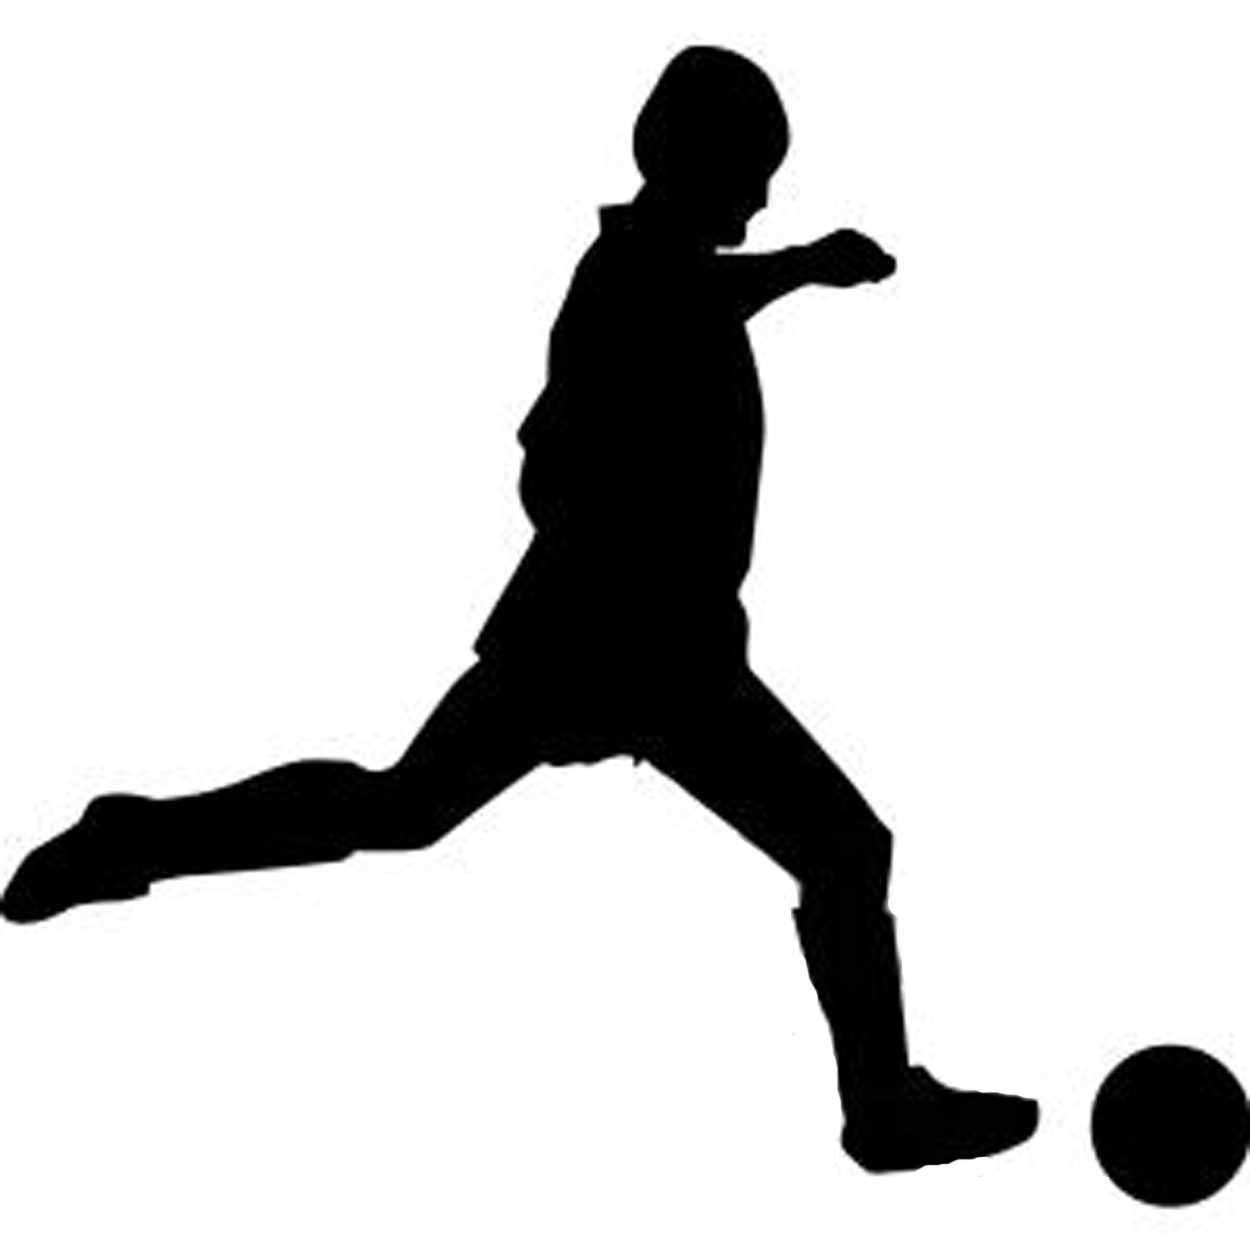 Silhouette Soccer - Clipart library